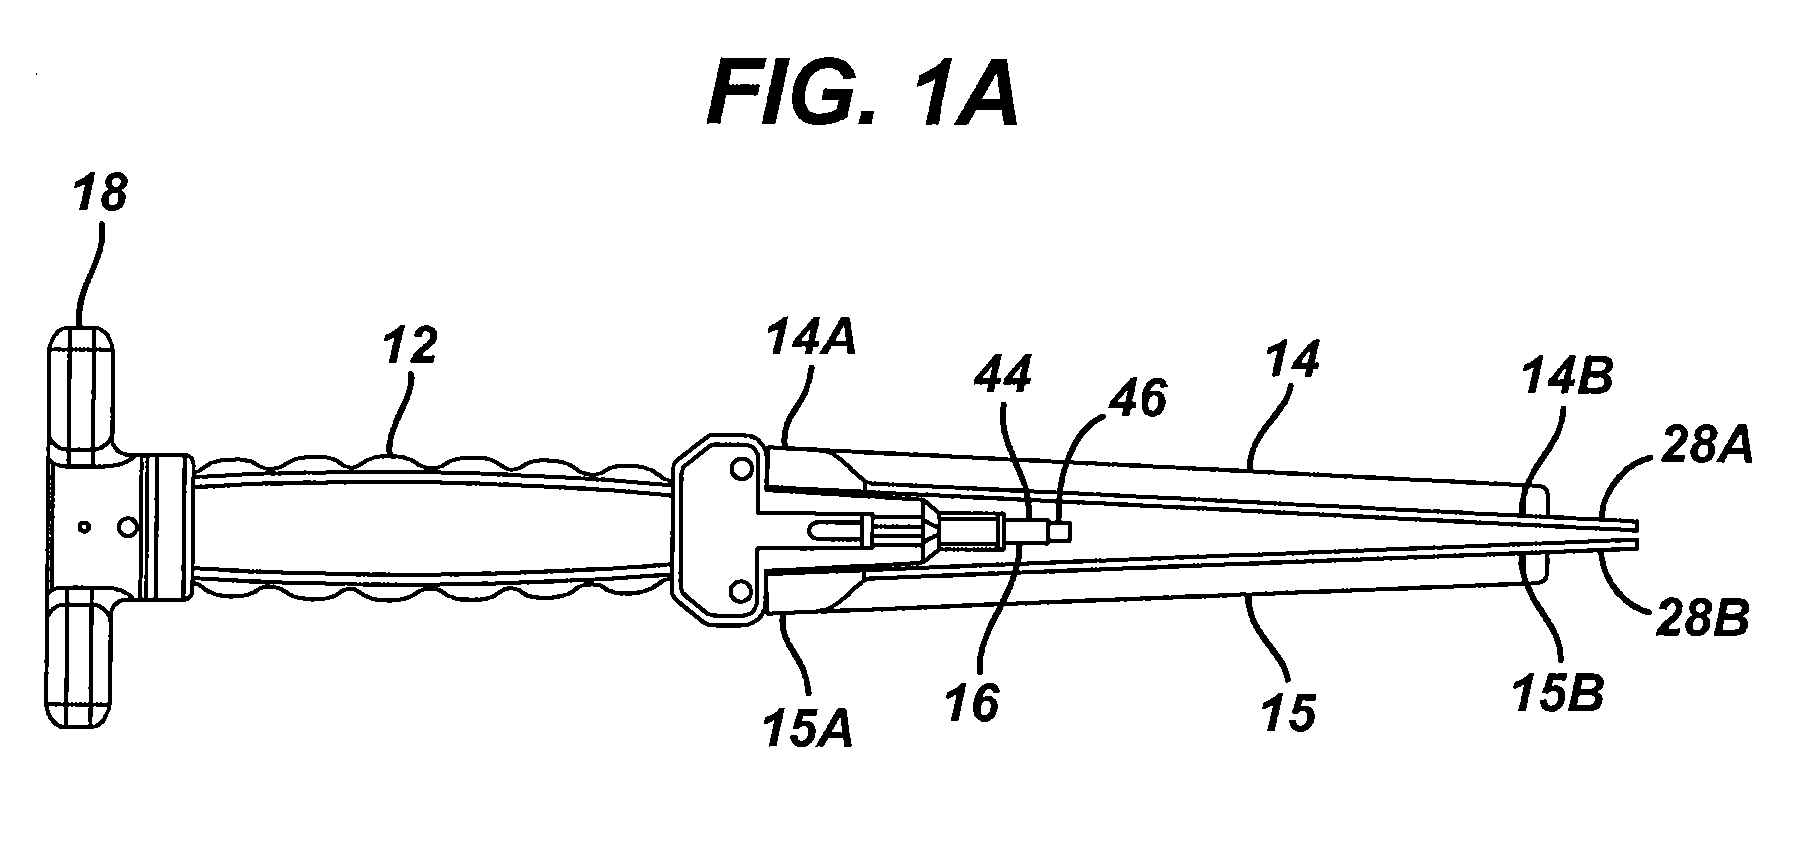 Medical Device installation tool and methods of use